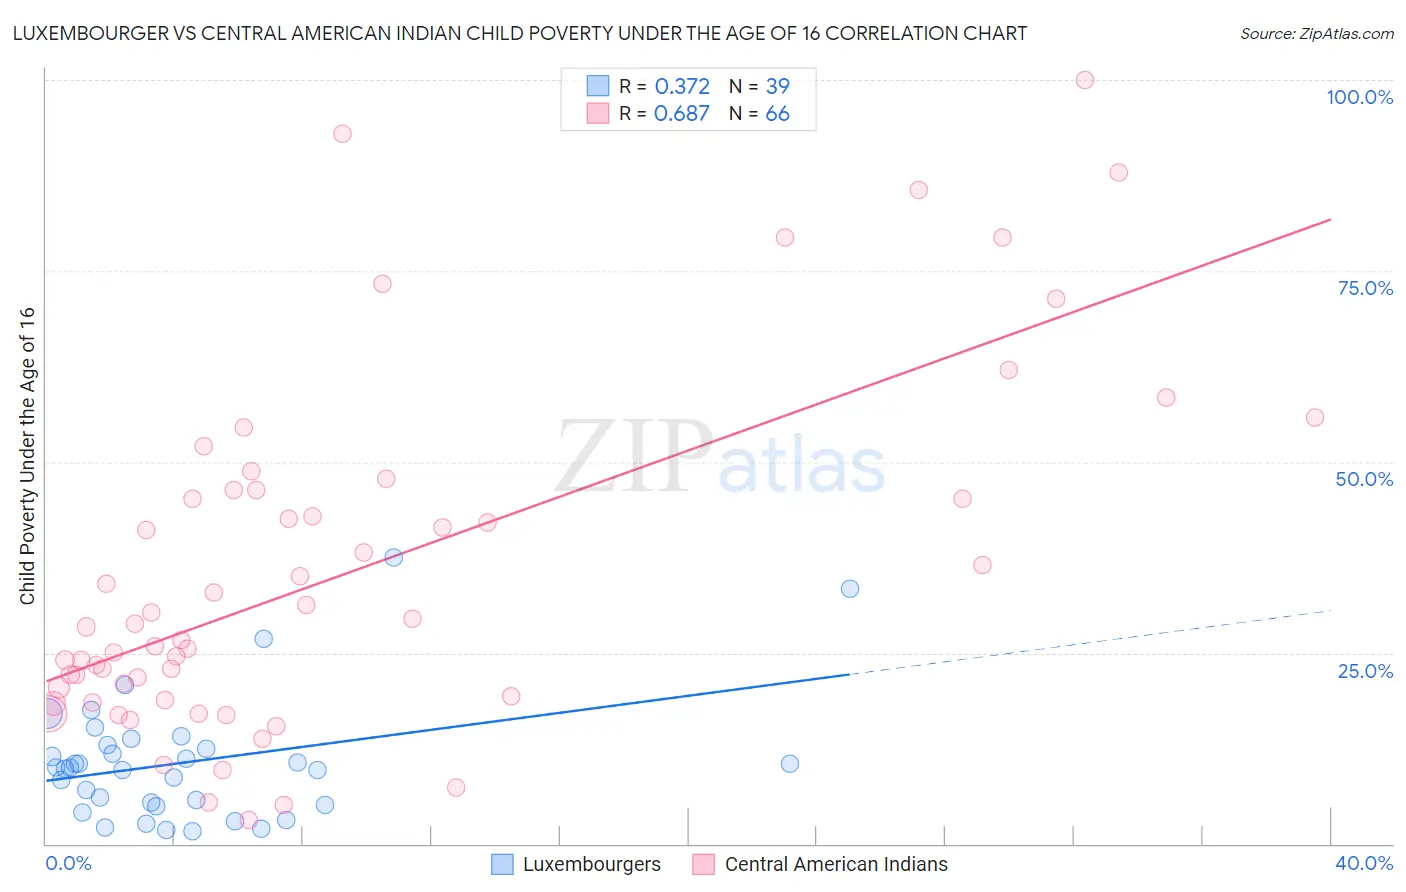 Luxembourger vs Central American Indian Child Poverty Under the Age of 16